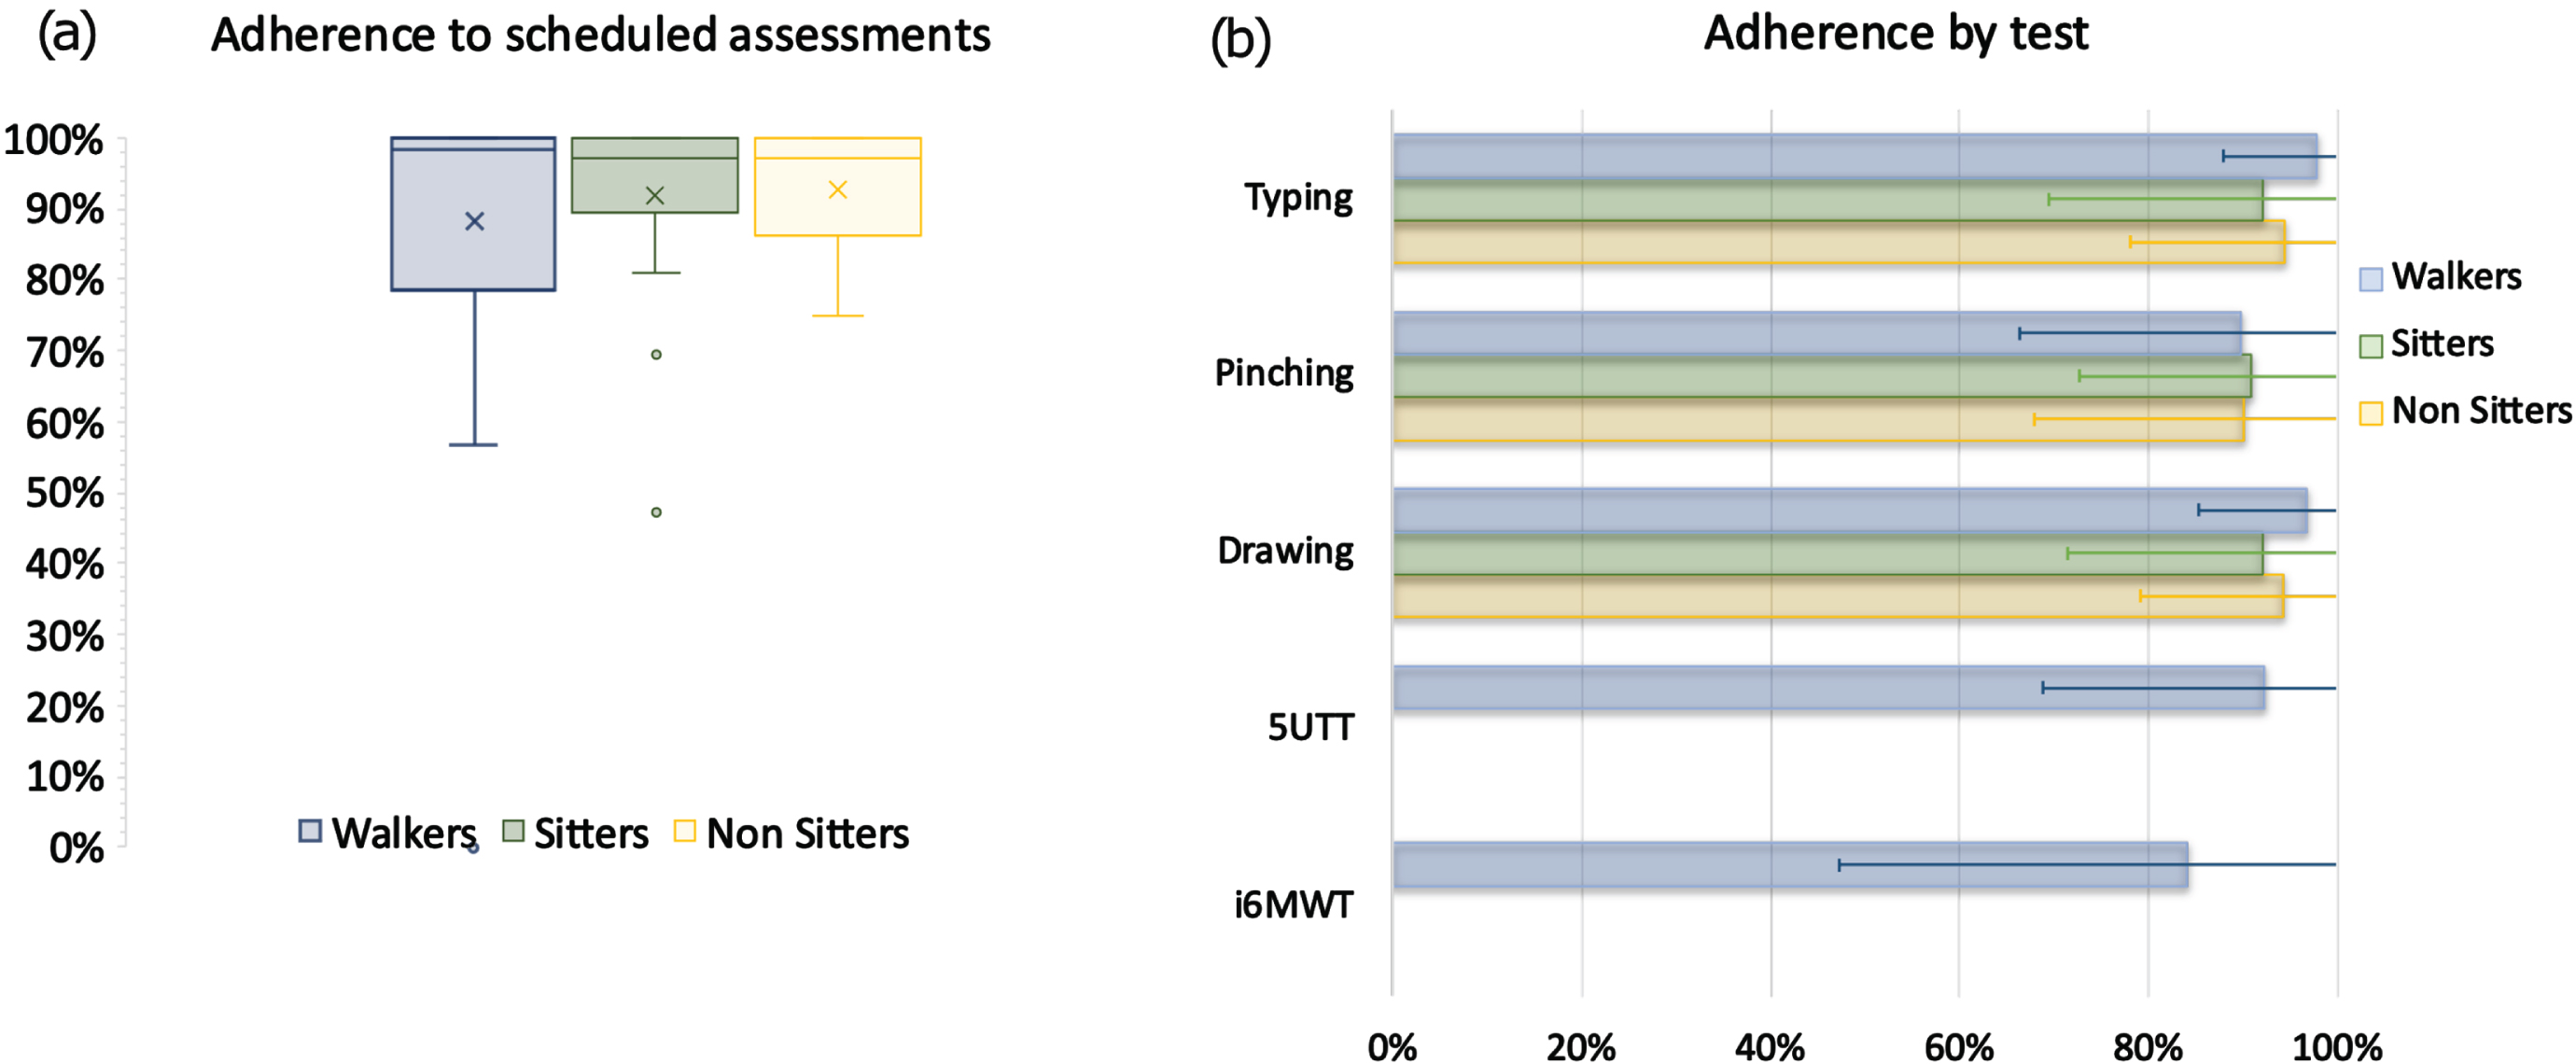 Mean adherence results shown at (a) group level (mean adherence per participant across all tests) and at (b) test level (mean adherence per test across all participants). The bars represent the corresponding standard deviations, which were clipped to the maximal possible adherence (100%).